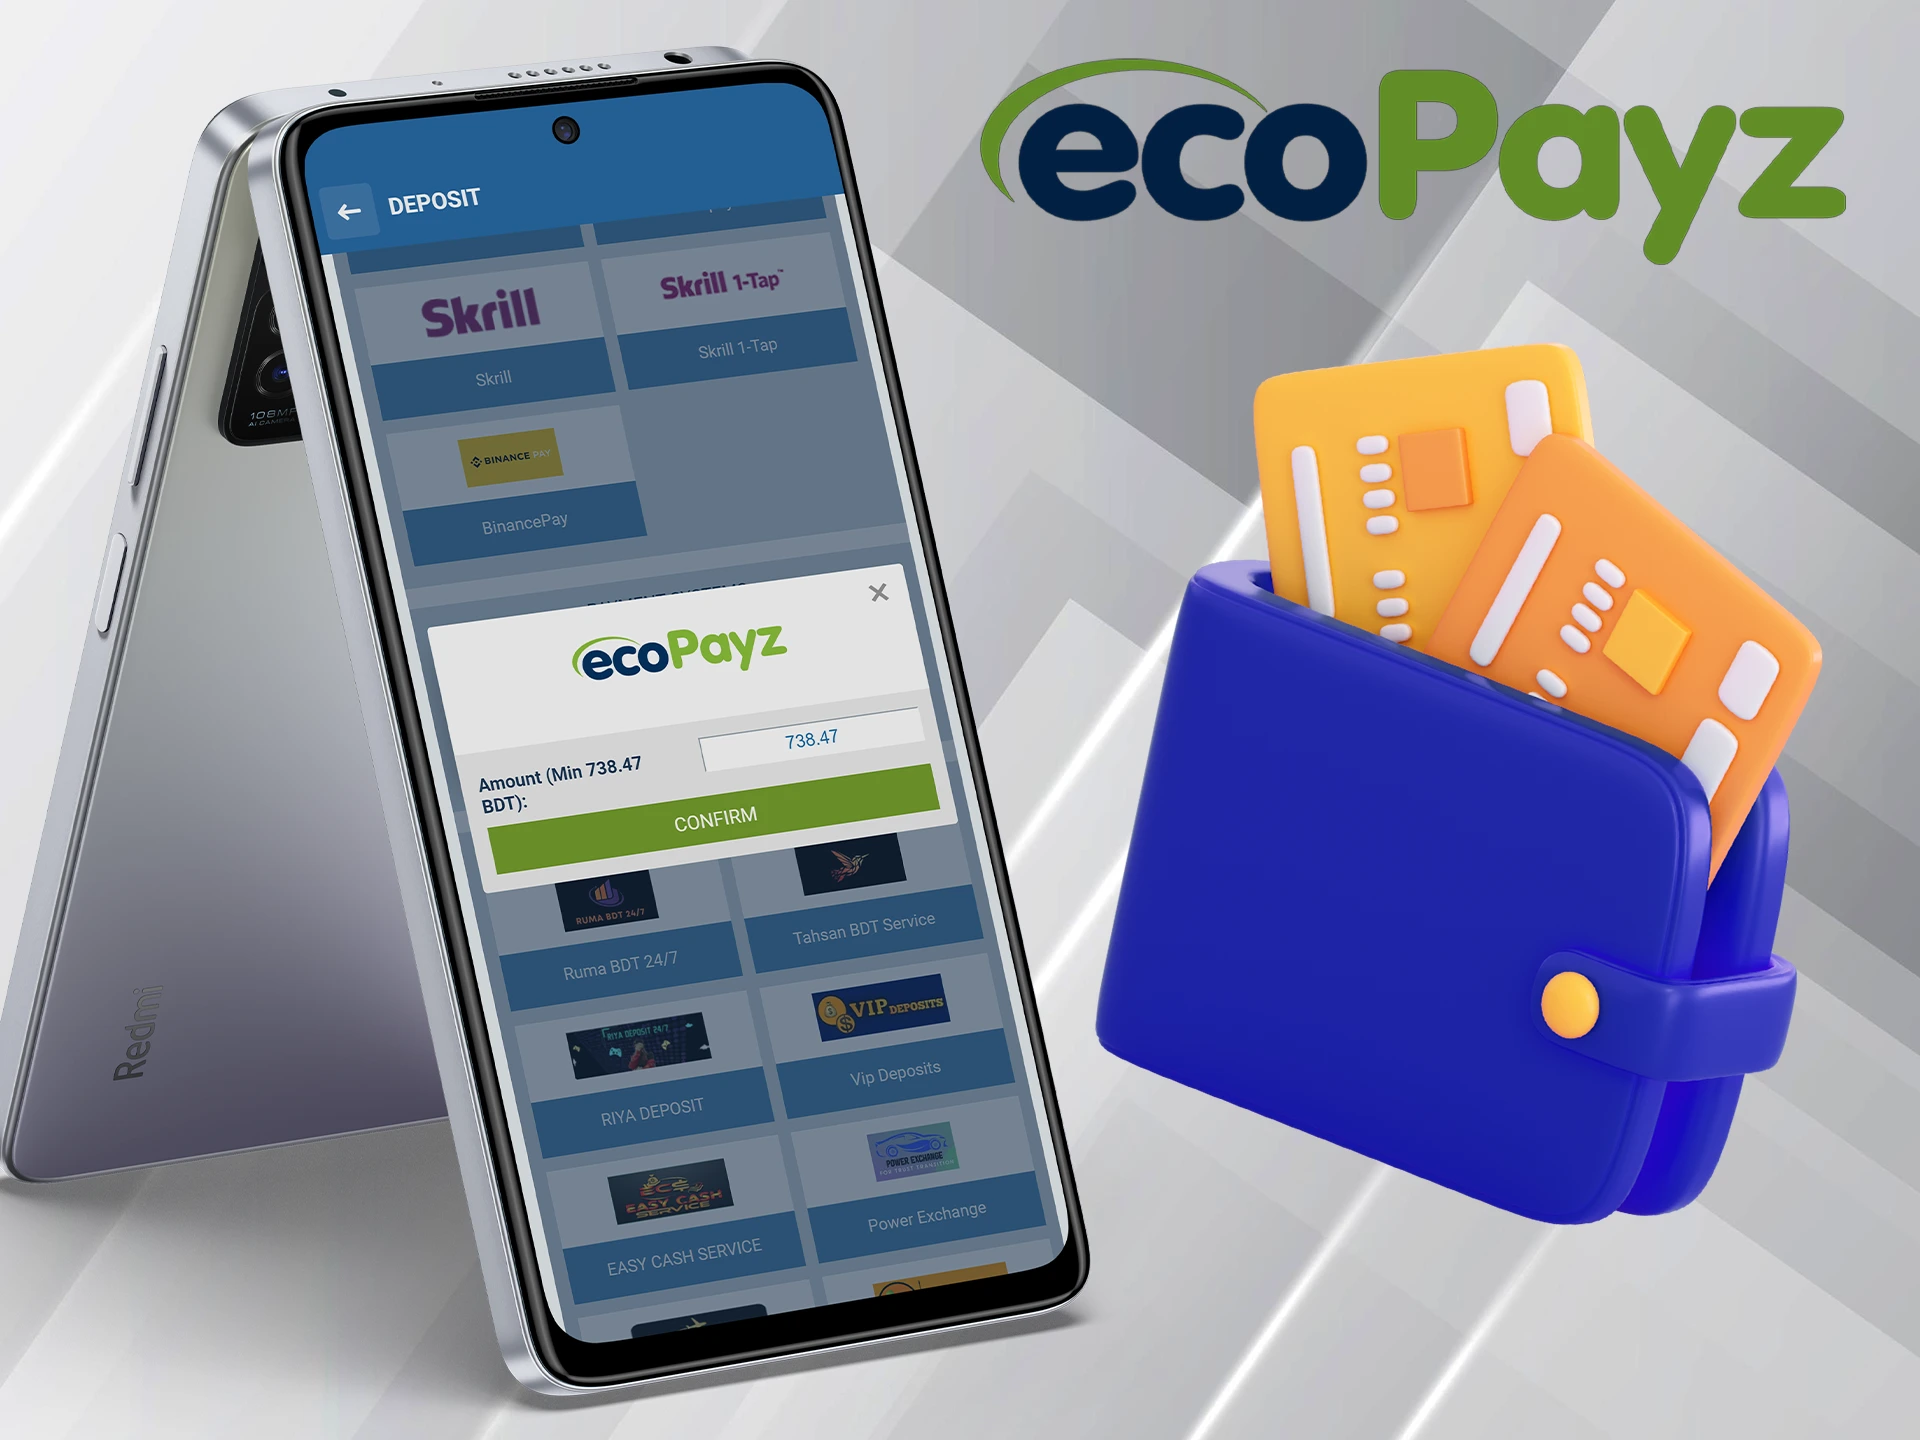 You can use ecoPayz to deposit and withdraw funds.